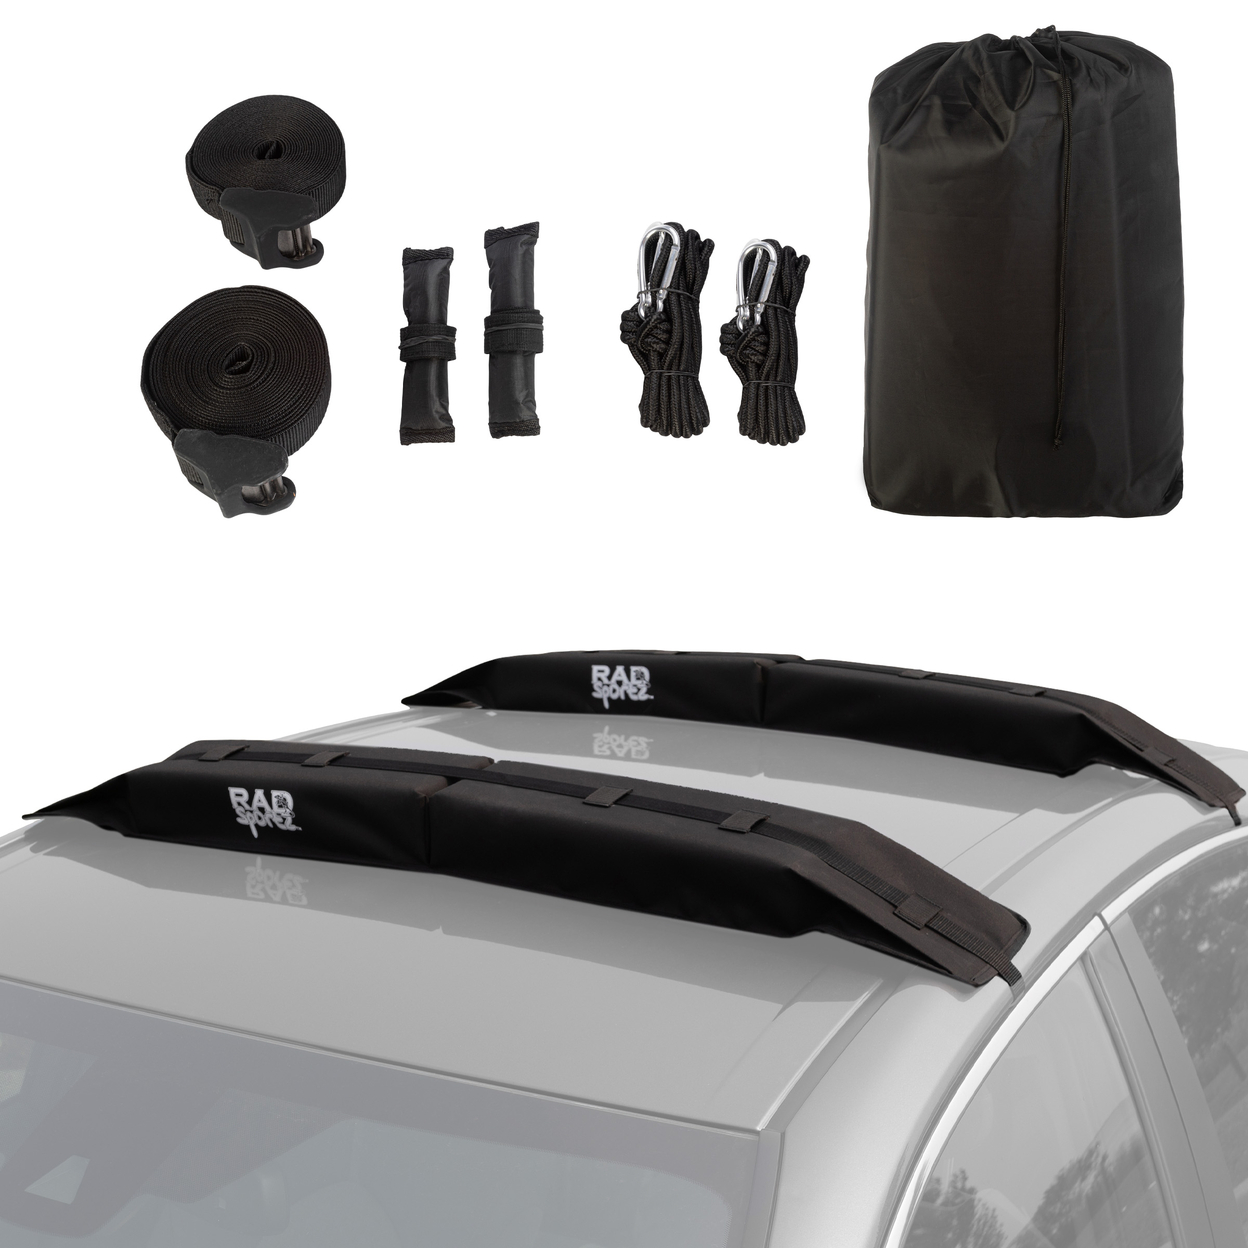 Kayak Roof Rack Universal Quick Loop Straps And Protective Pads